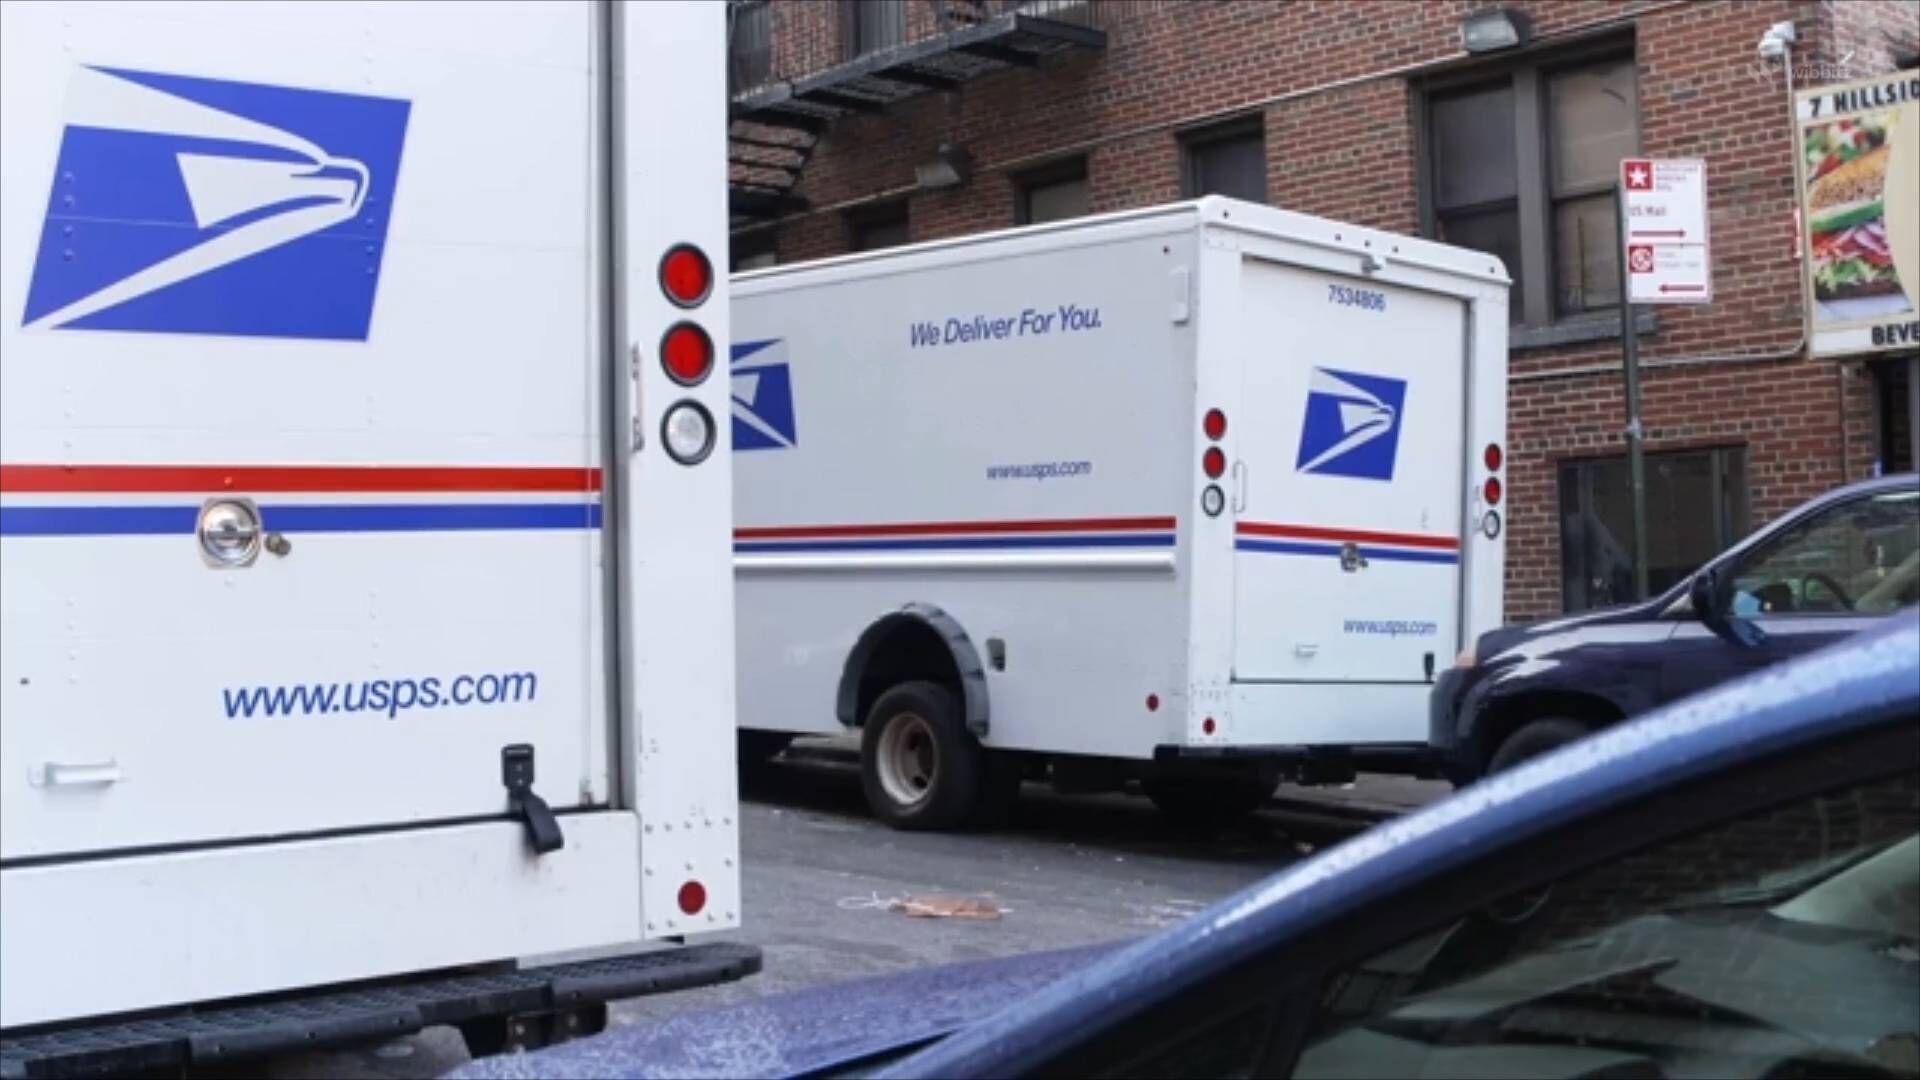 USPS considers moving some mail processing operations out of